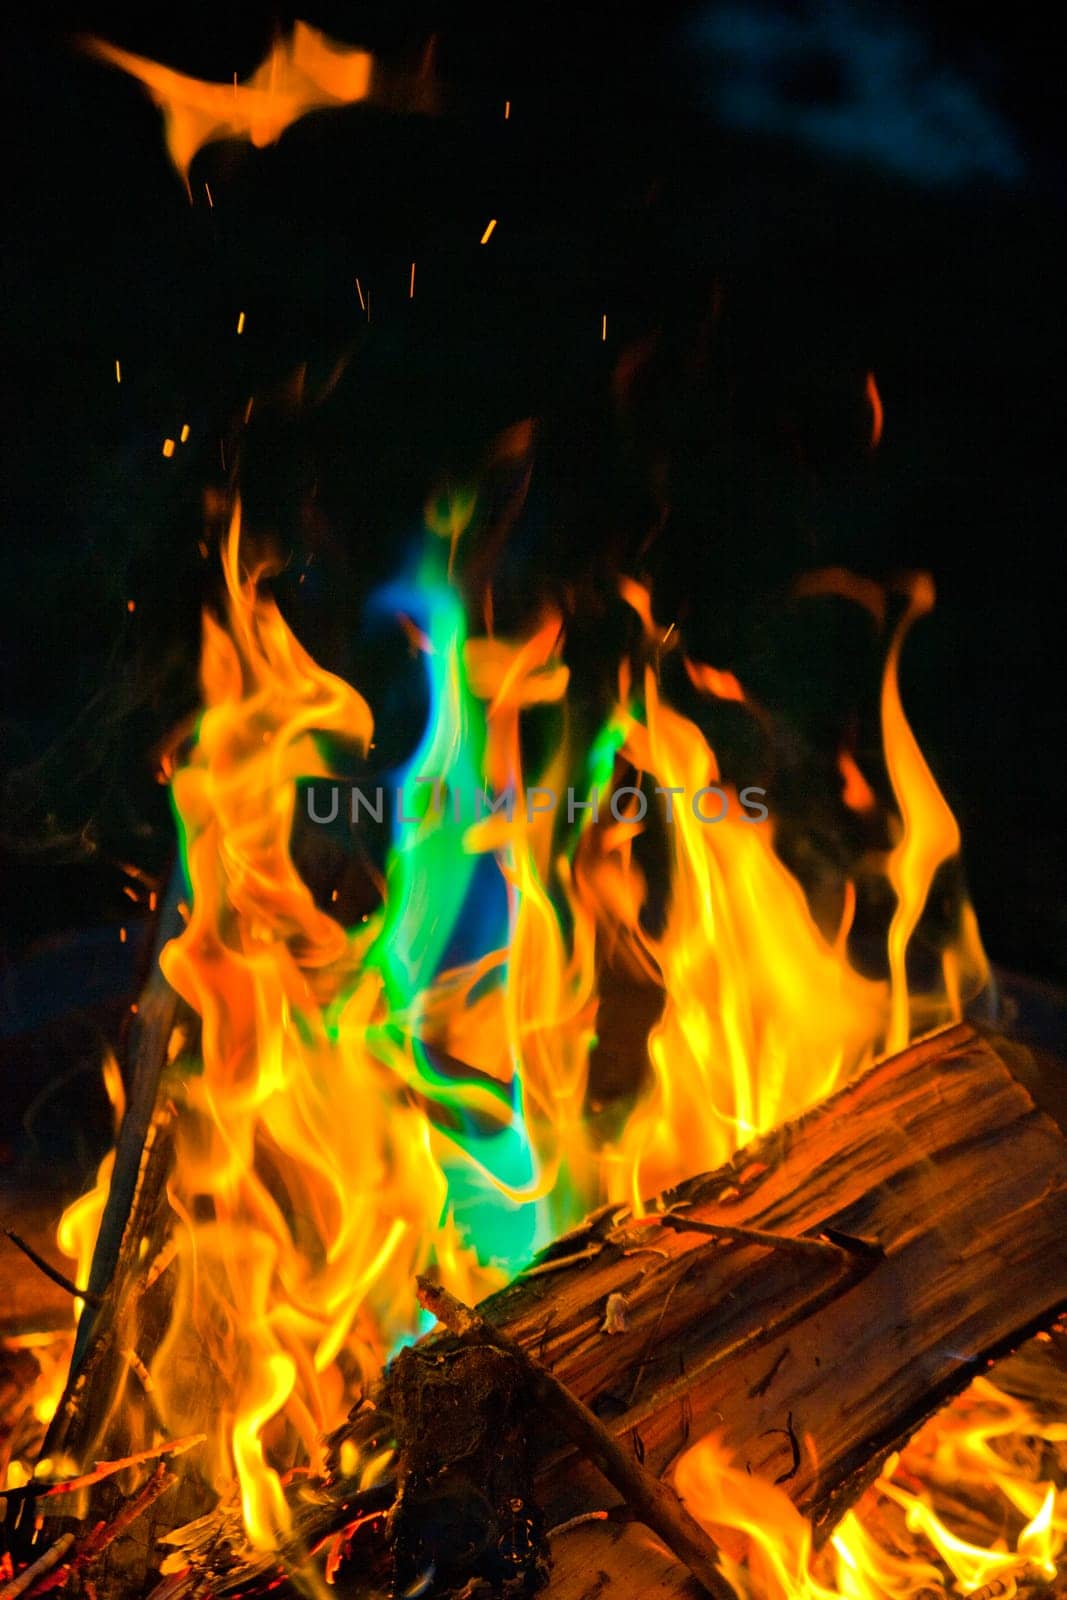 Vibrant Spectrum of Flames in Wood Fire at Night with Blue-Green Flare by njproductions